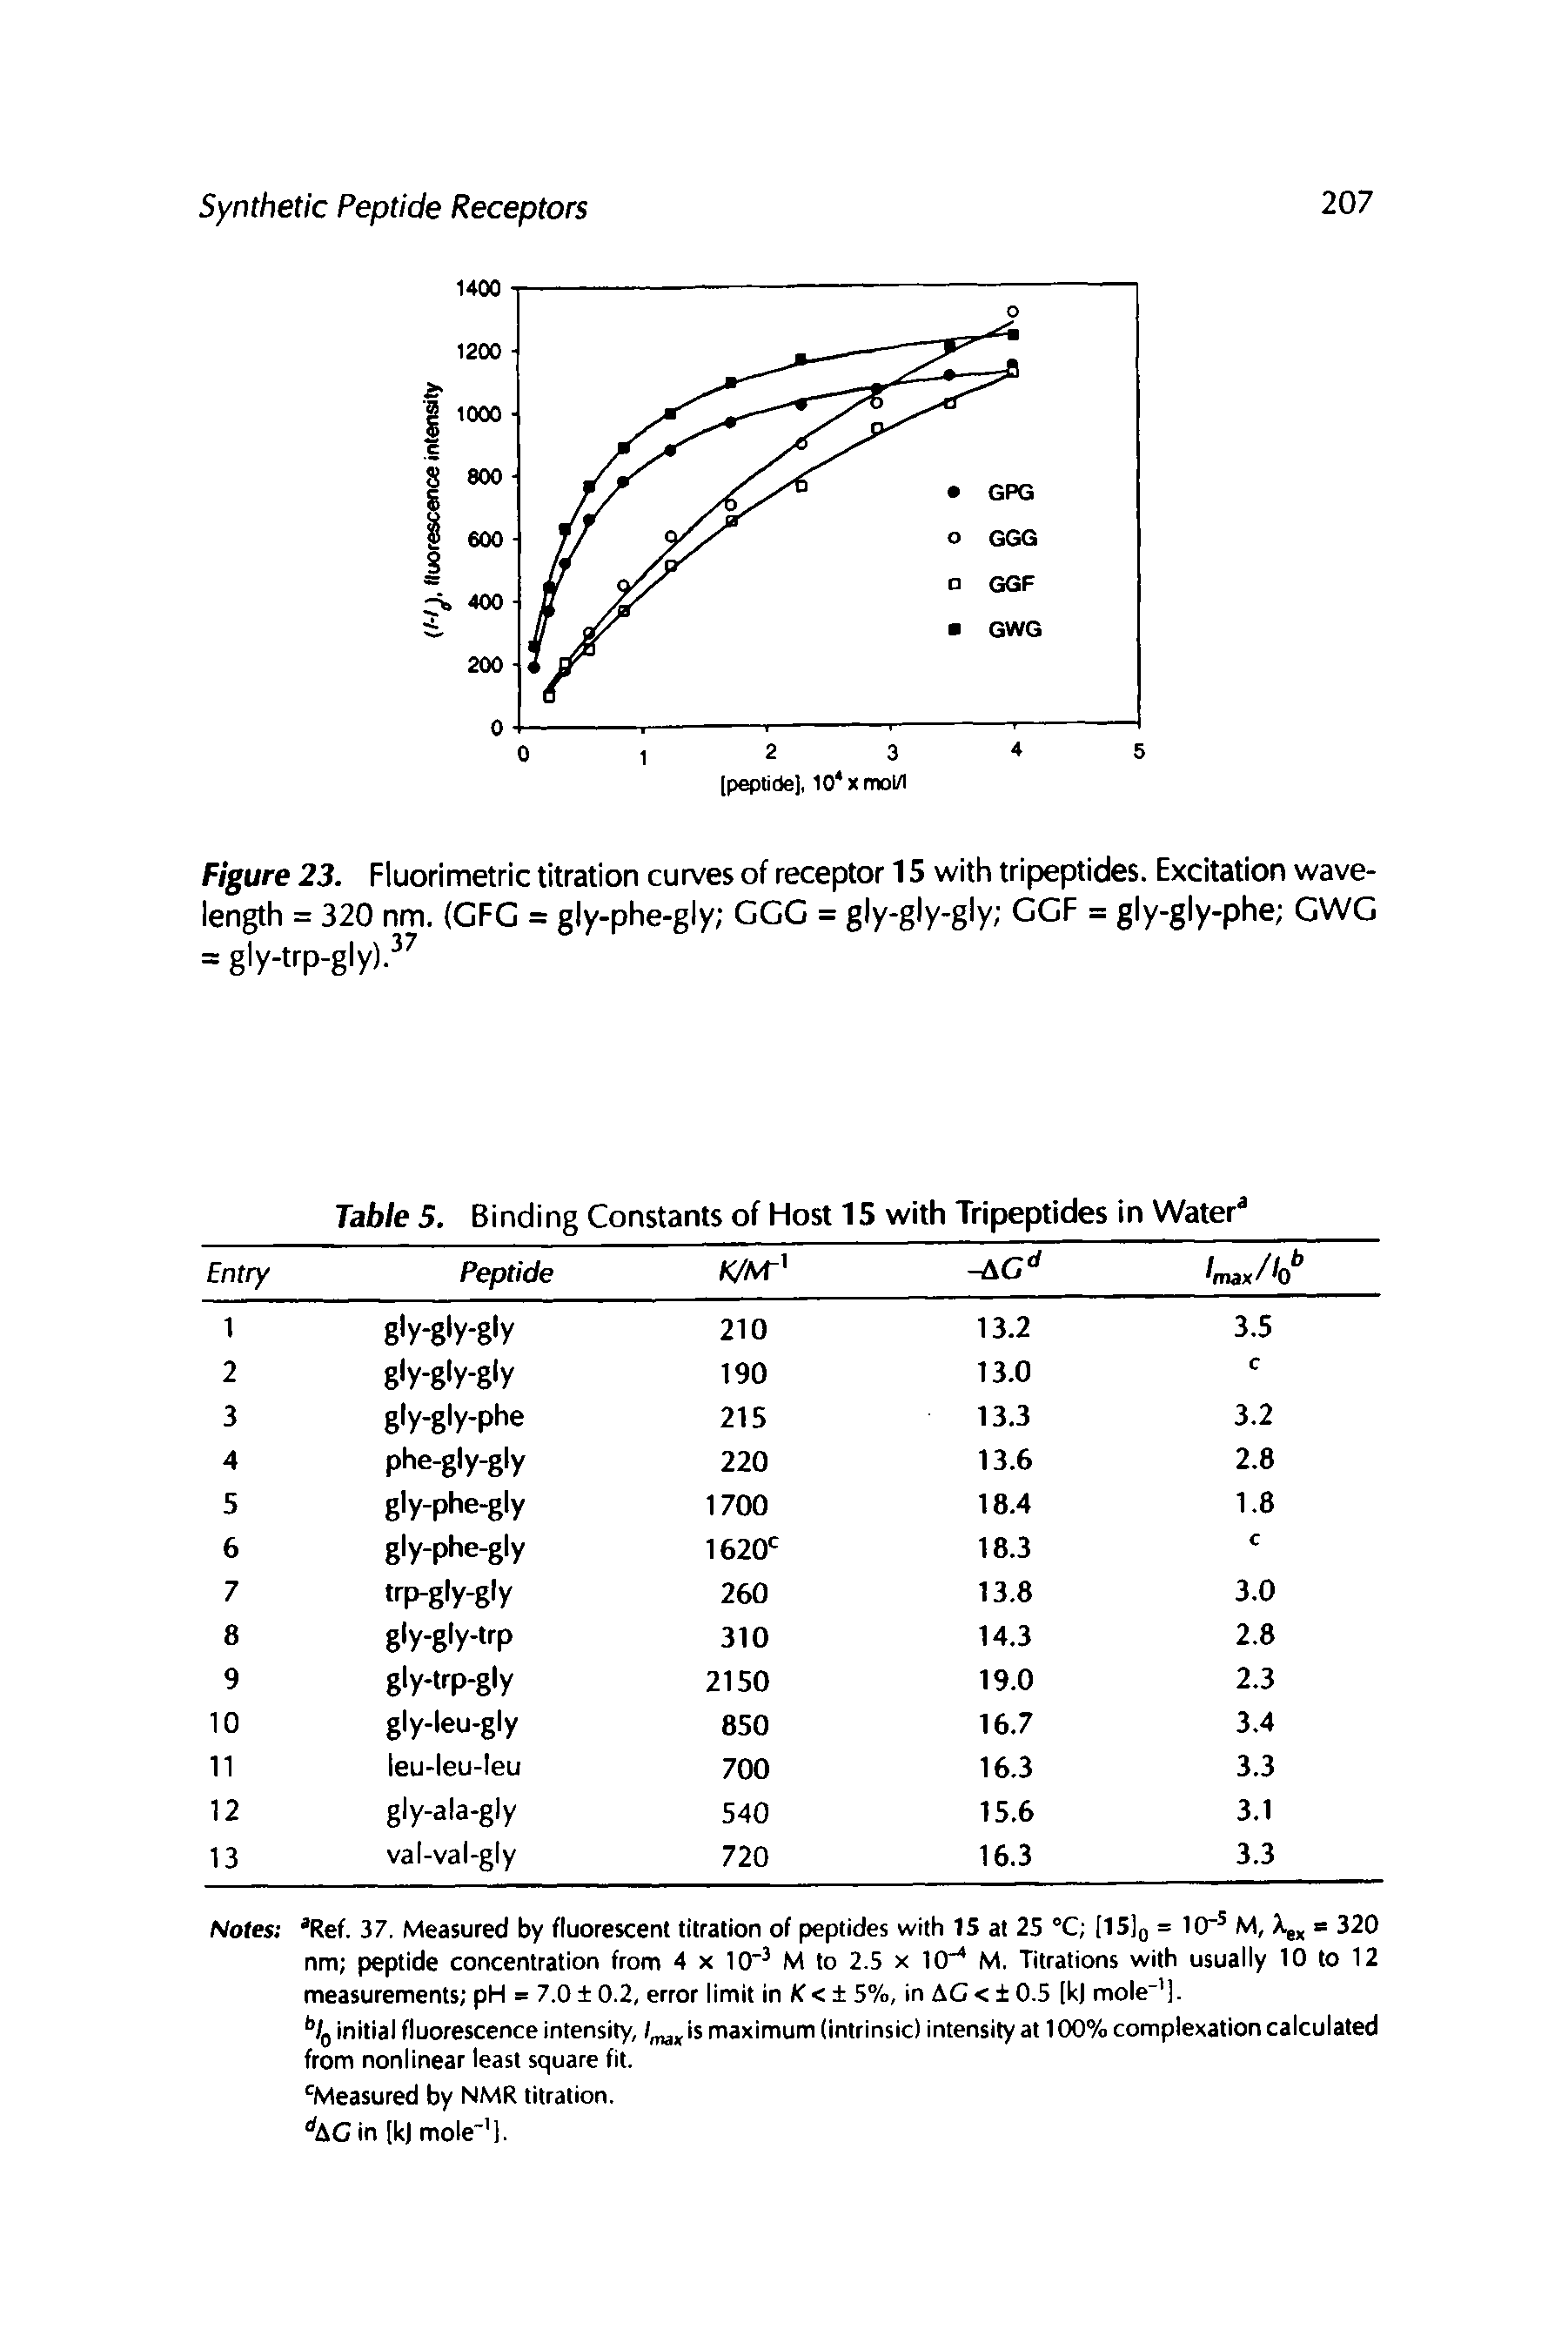 Figure 23. Fluorimetric titration curves of receptor 15 with tripeptides. Excitation wavelength = 320 nm. (CFG = gly-phe-gly CGC = gly-gly-gly GGF = gly-gly-phe GWG = giy-trp-giy). ...